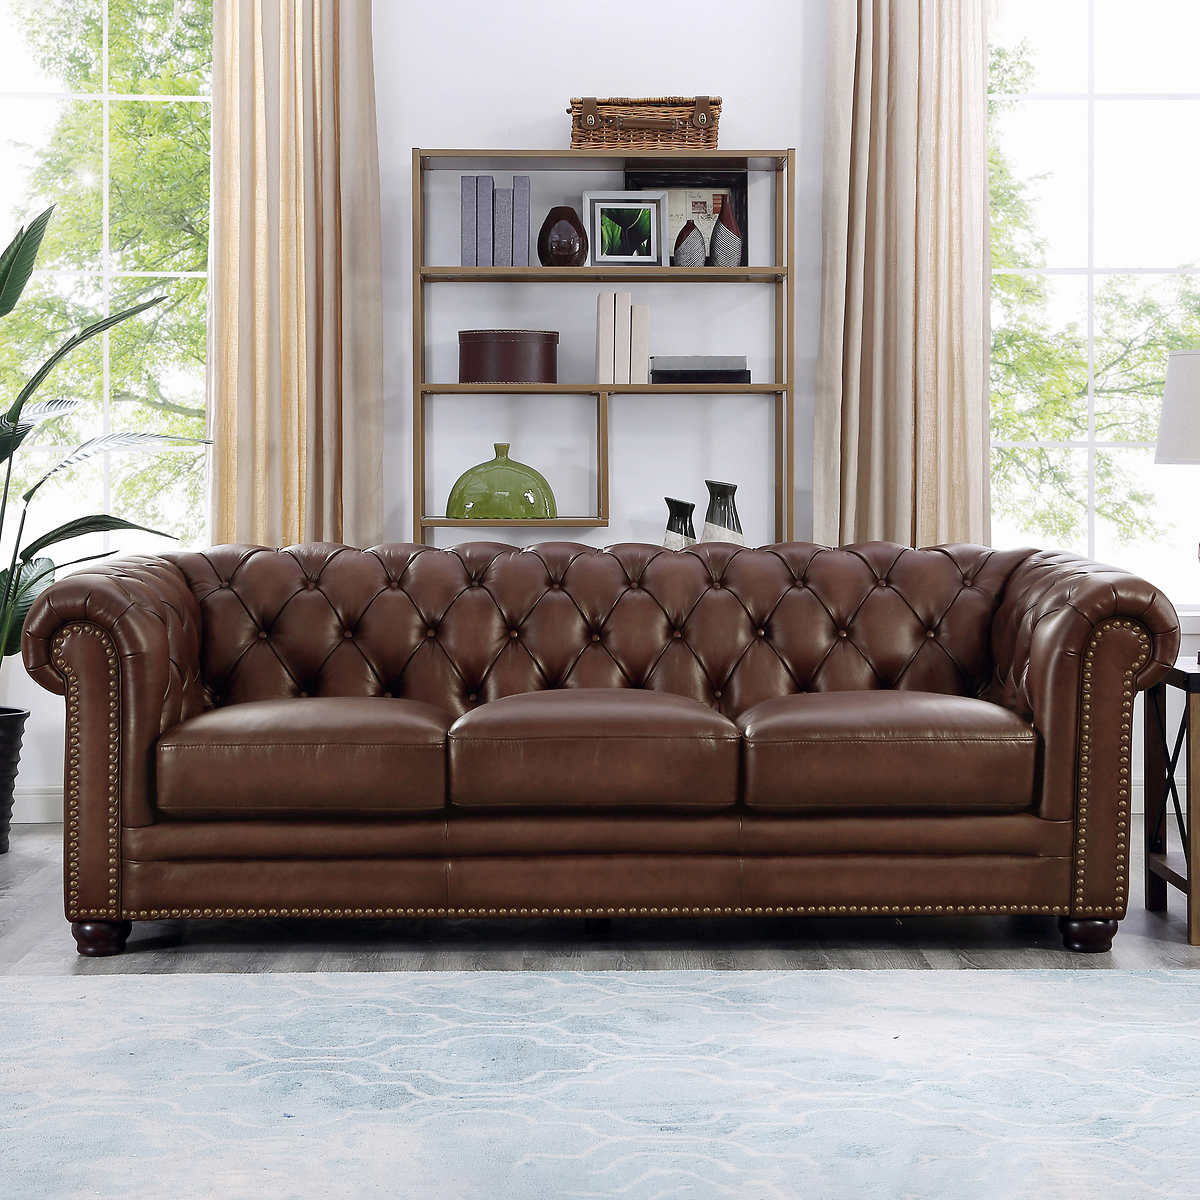 Allington Top Grain Leather Sofa, Leather Couch Tufted